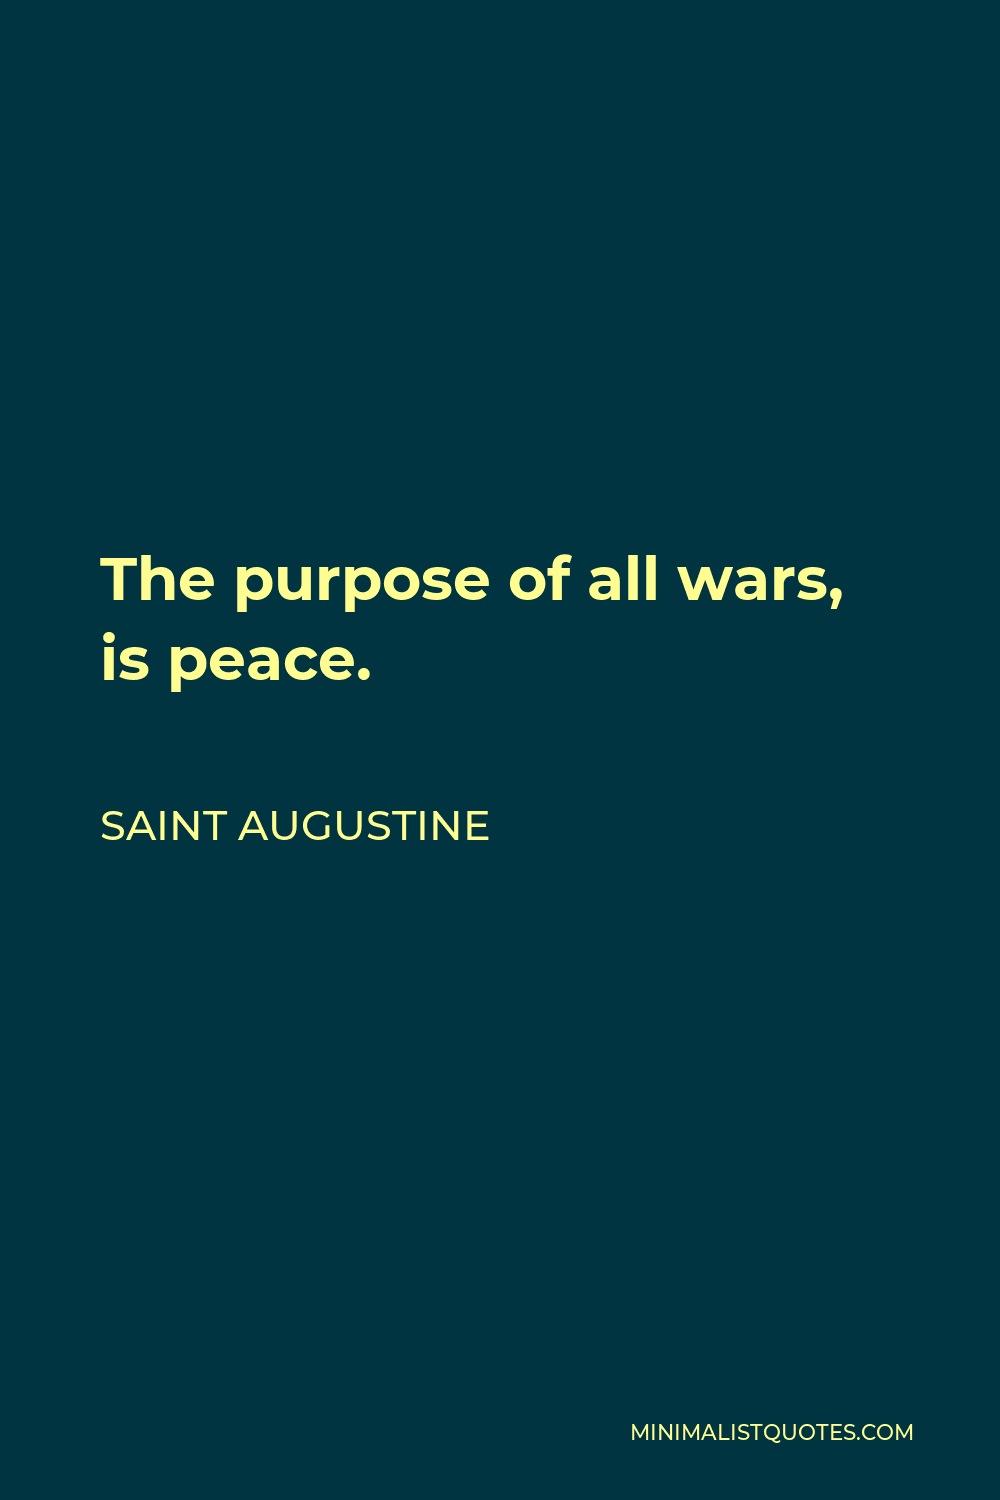 Saint Augustine Quote - The purpose of all wars, is peace.